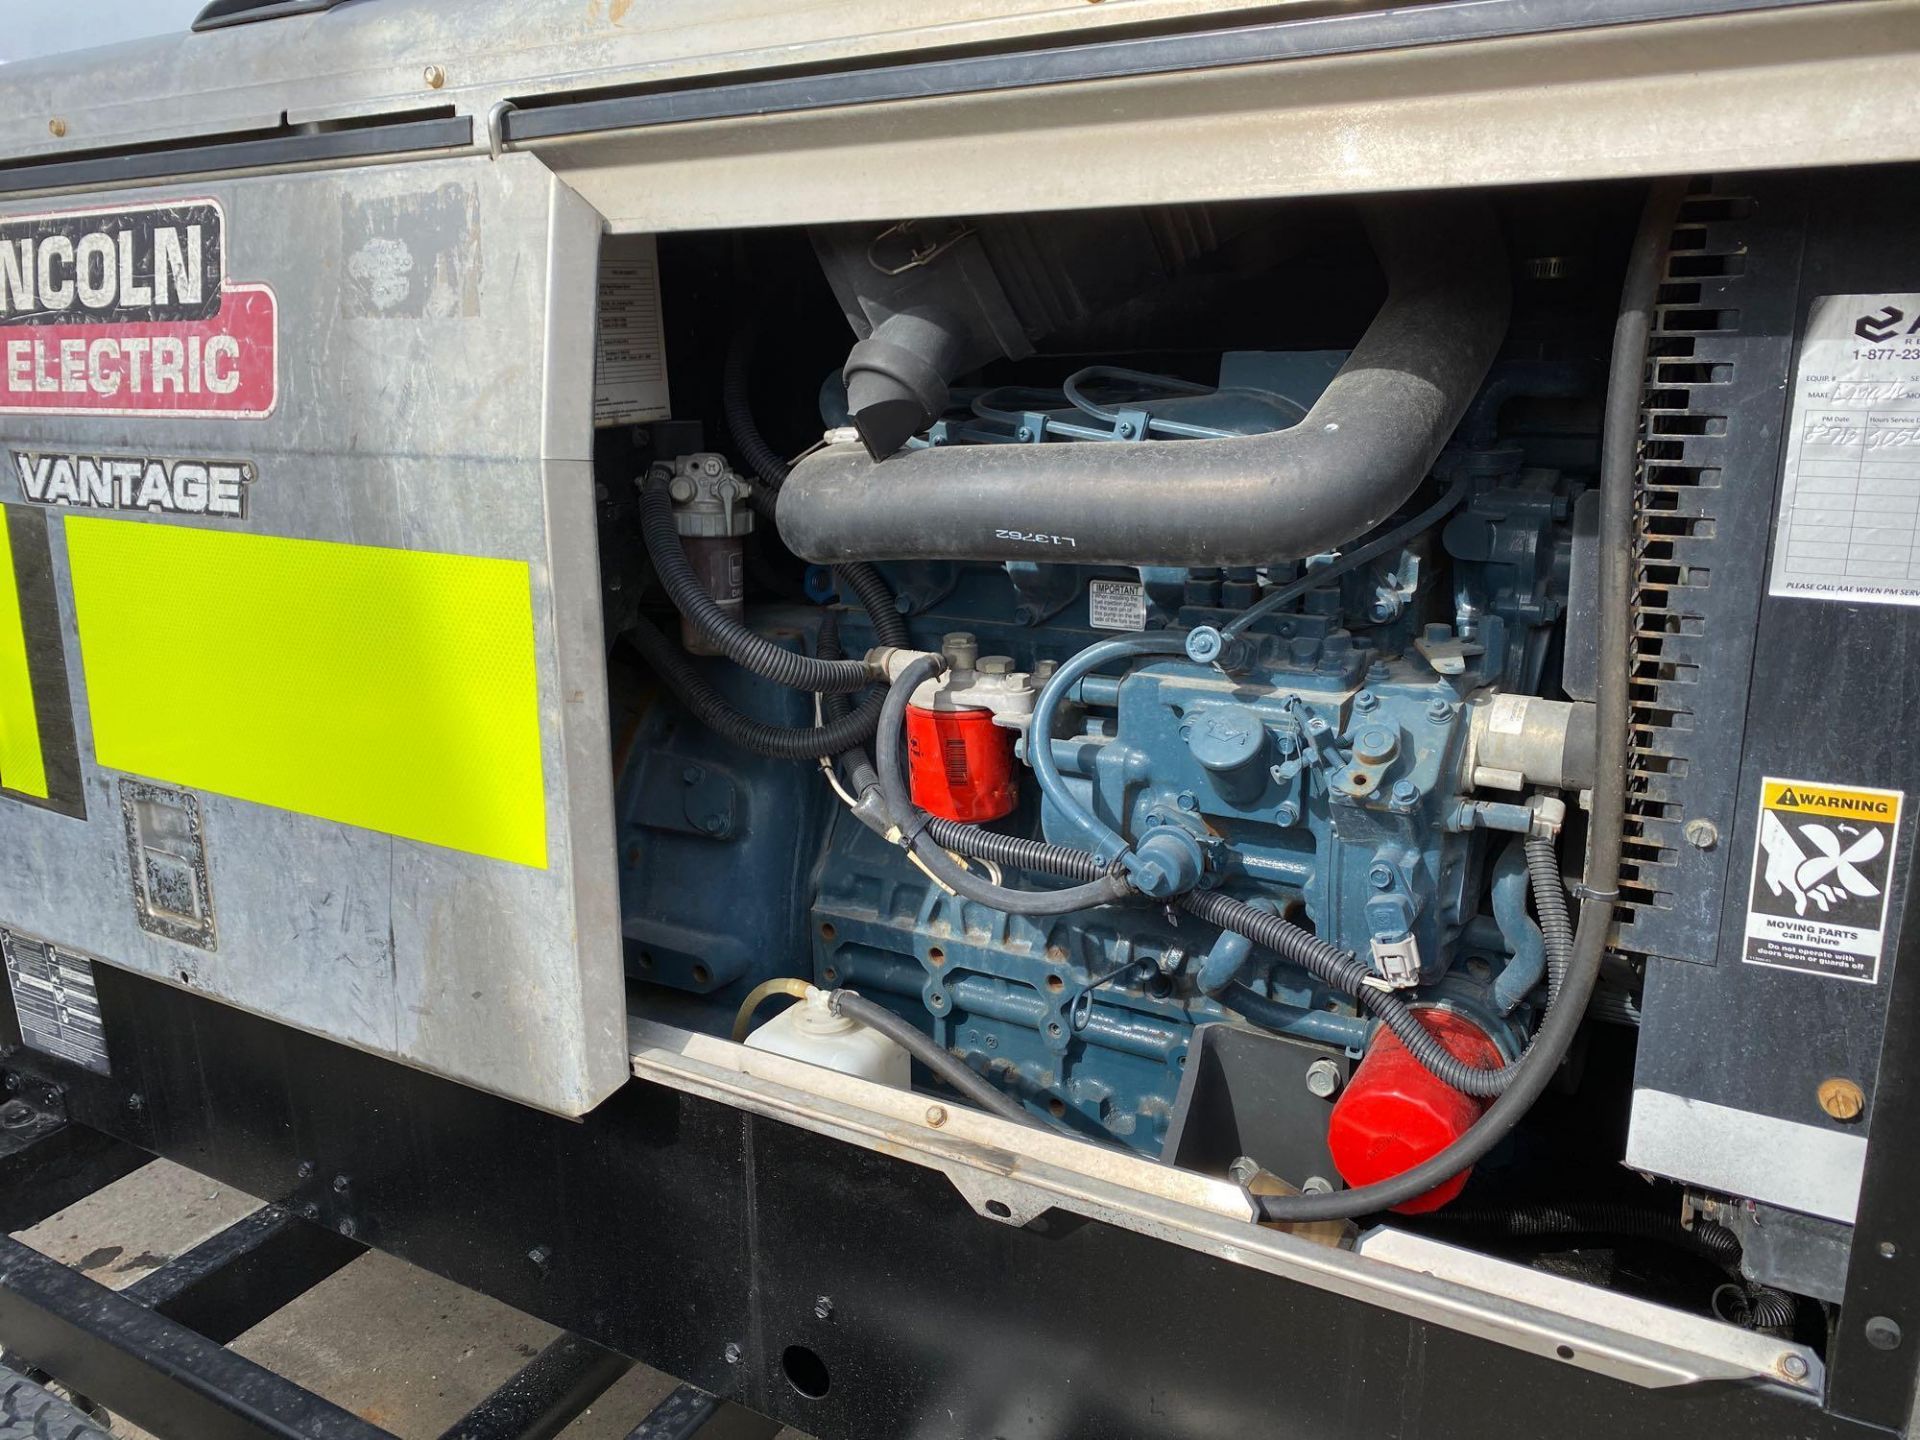 2013 LINCOLN ELECTRIC VANTAGE 4000 TRAILER MOUNTED DIESEL WELDER, RUNS AND OPERATES - Image 2 of 5